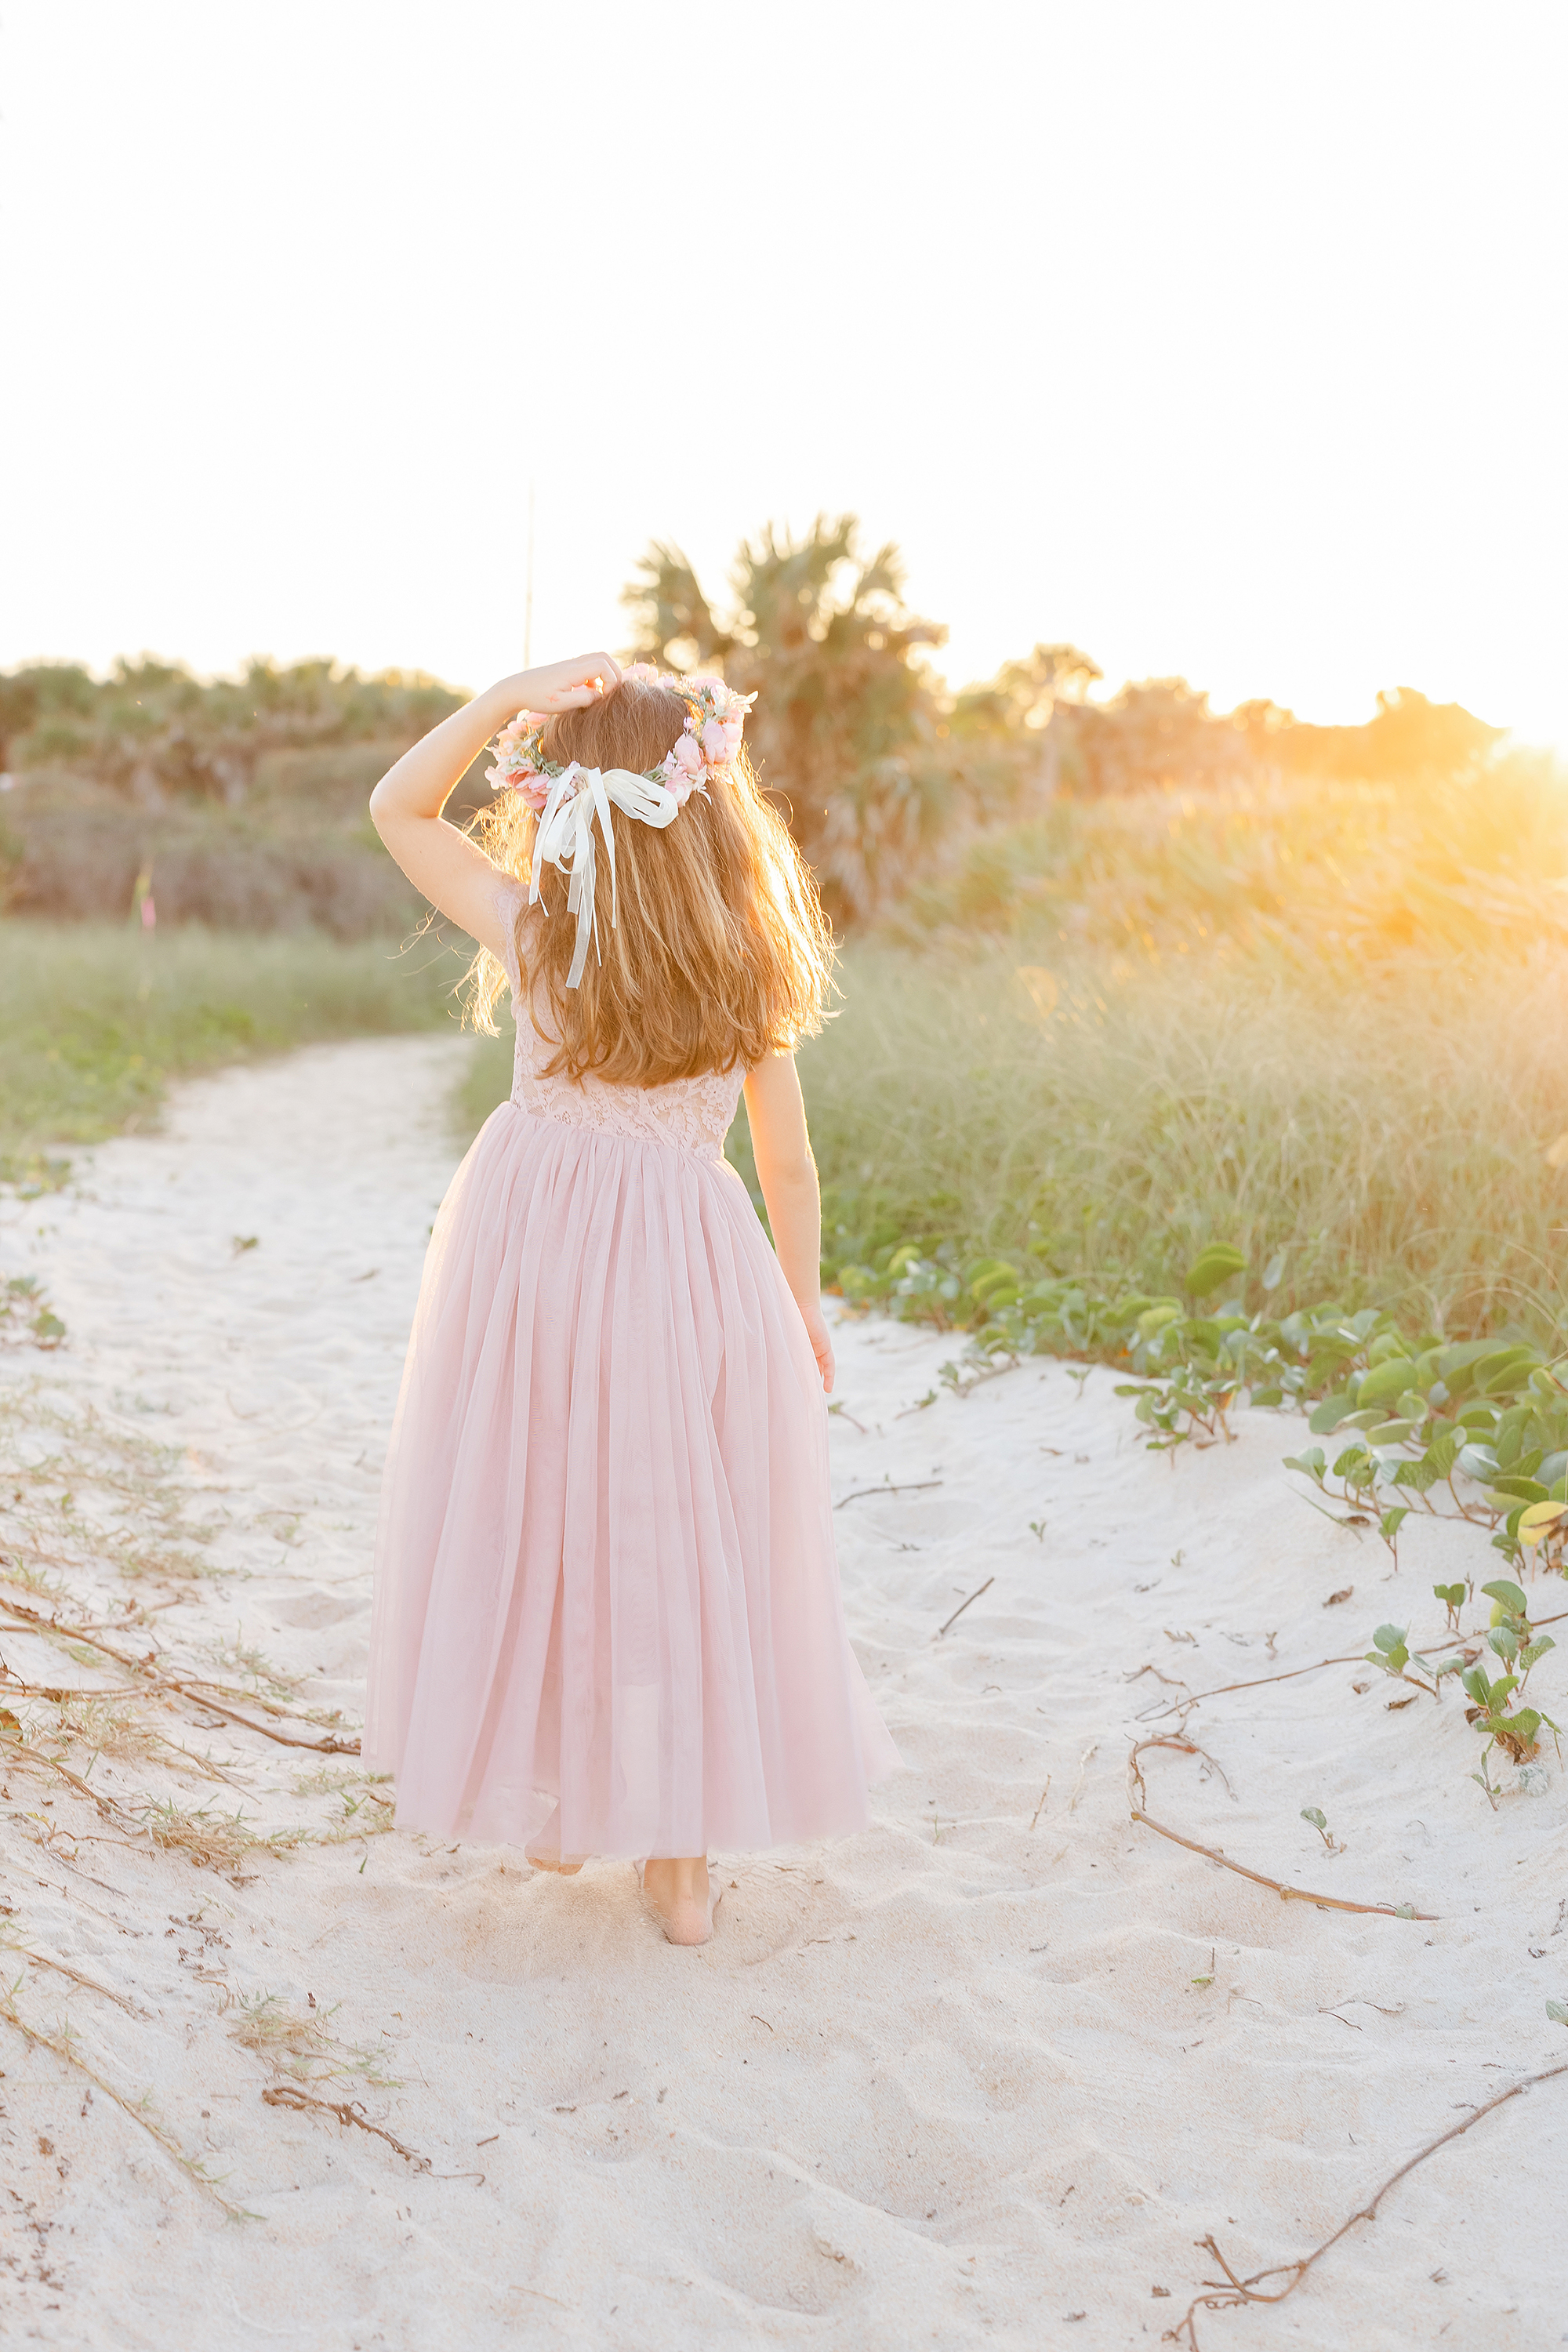 Sunlit portrait of a little girl in a flower crown and long pink skirt on the beach in St. Augustine.